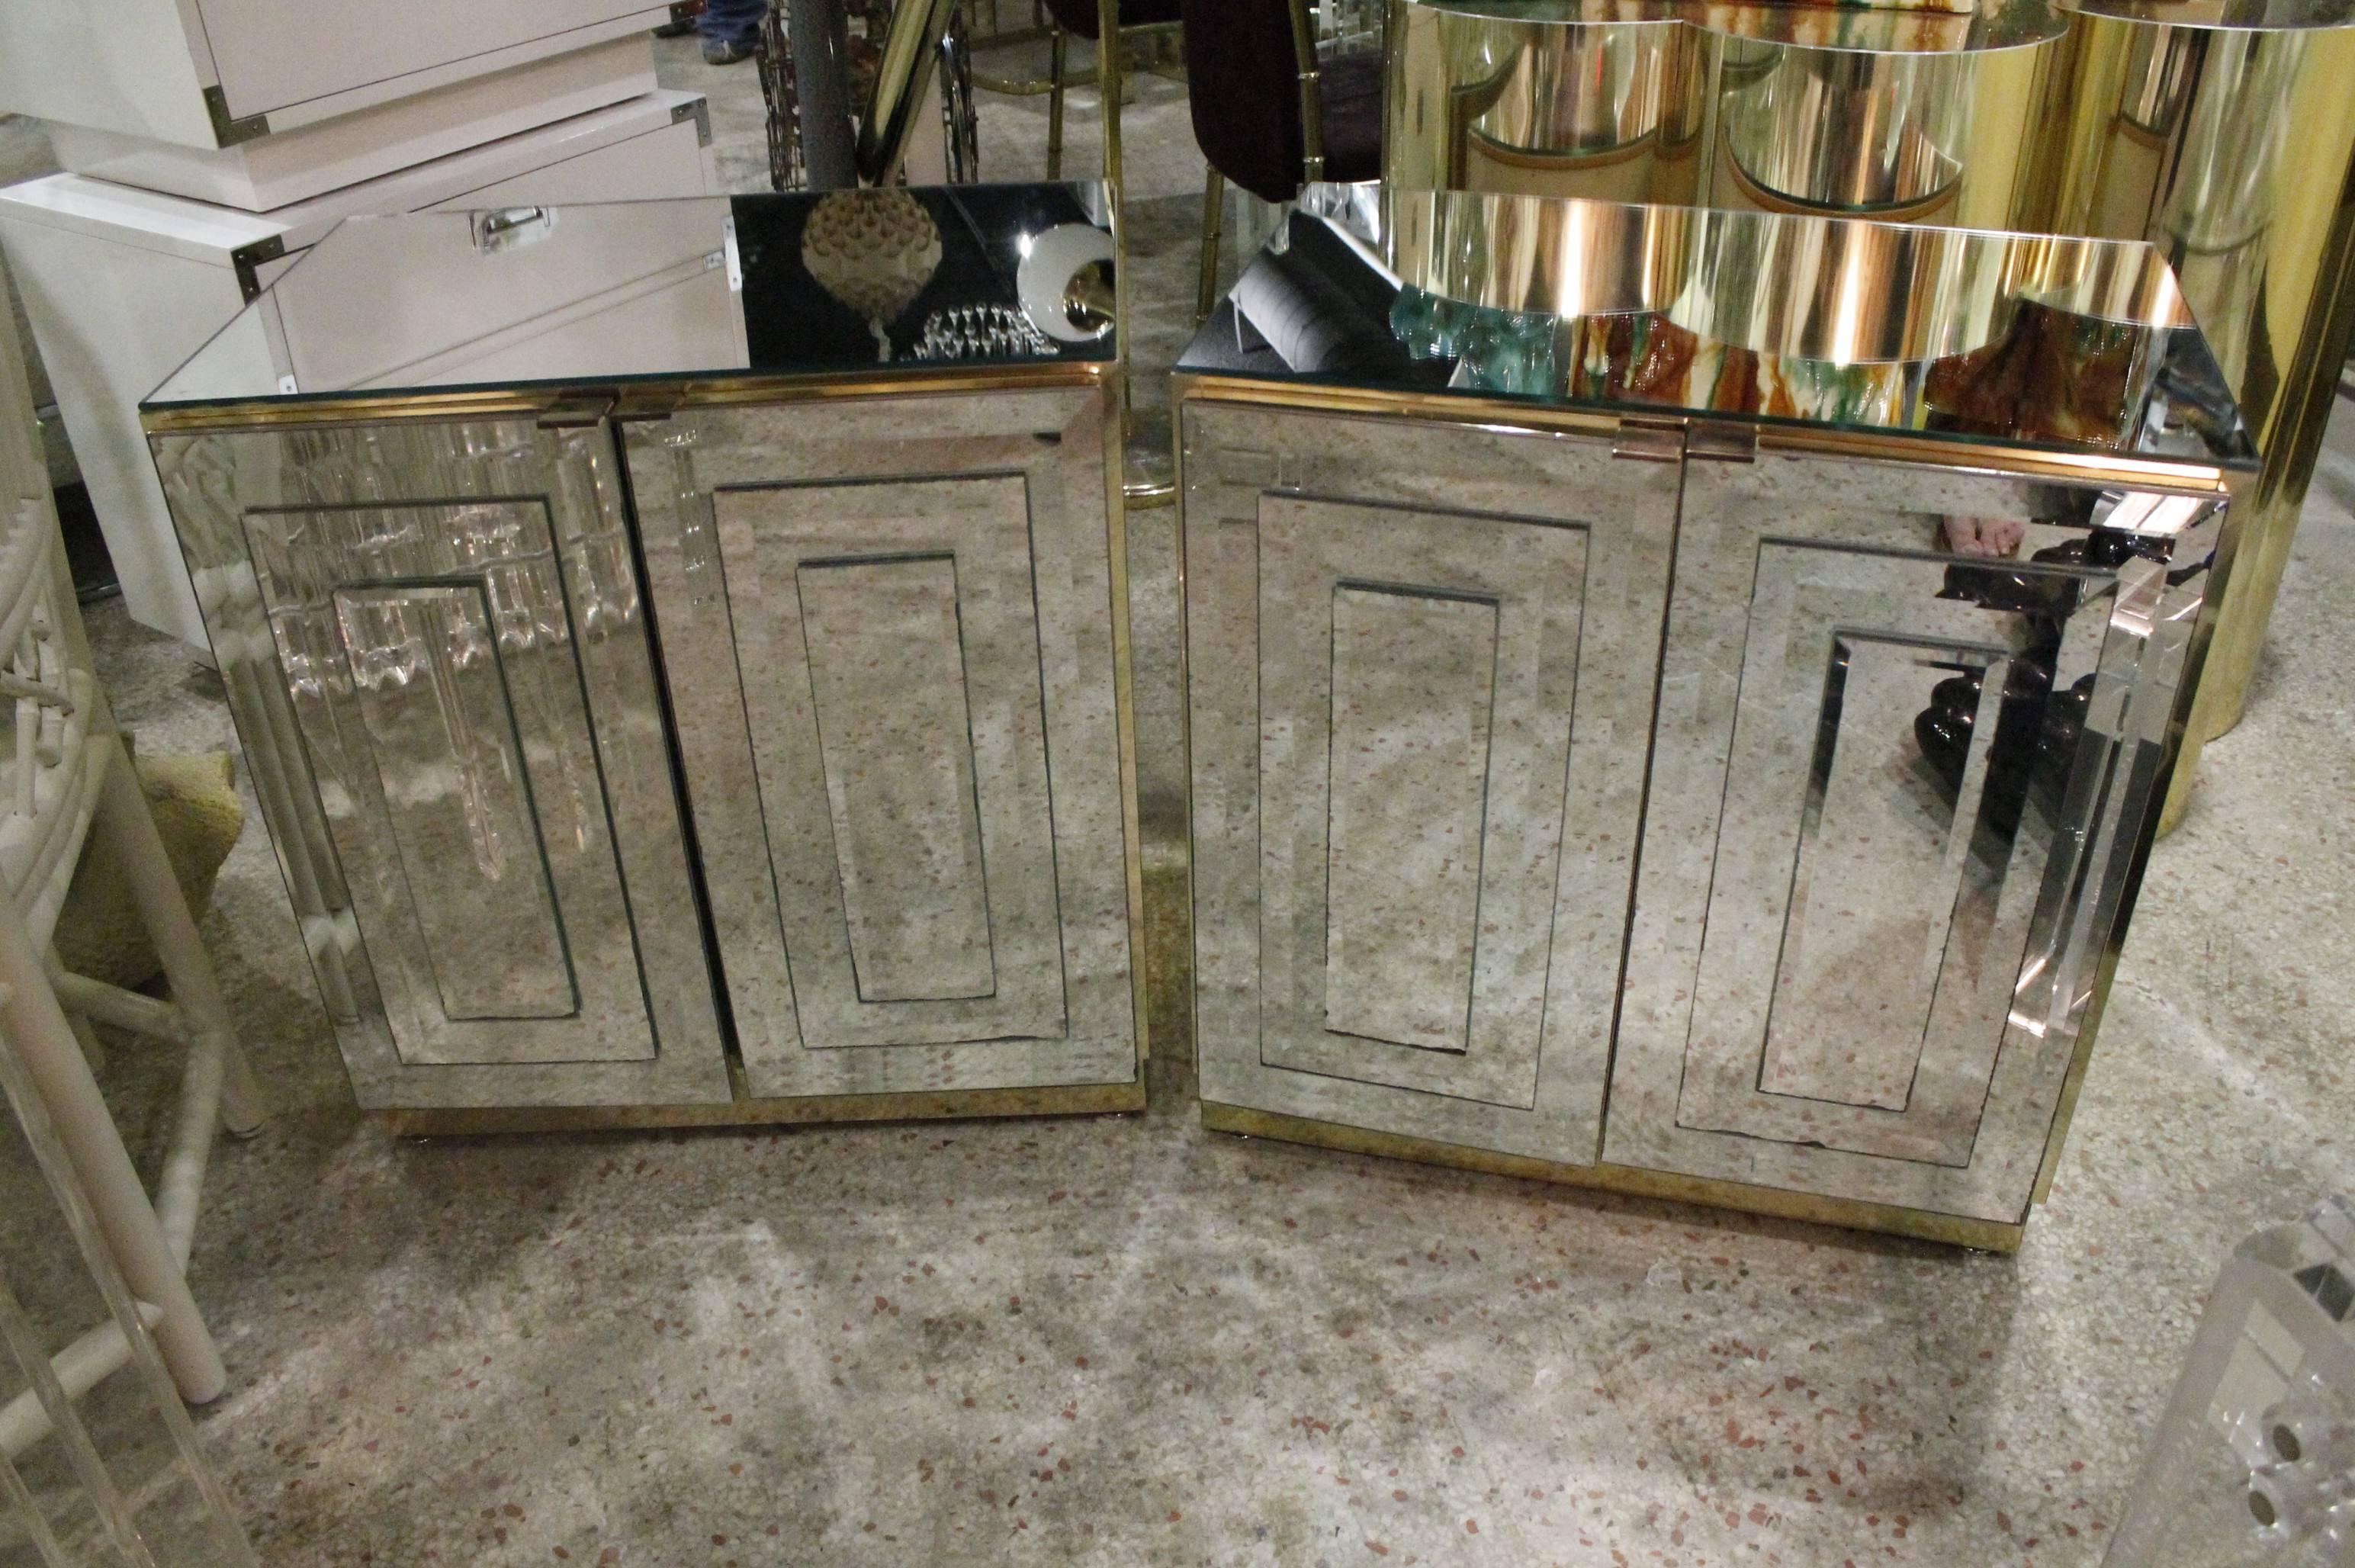 Amazing pair of vintage Hollywood Palm Beach Regency  Ello Mirrored mirror brass nightstands chests. Rare to find a pair in the mirrored with brass especially! One side of door mirror has some silver loss (pictured). 
Top measures 16" deep. I